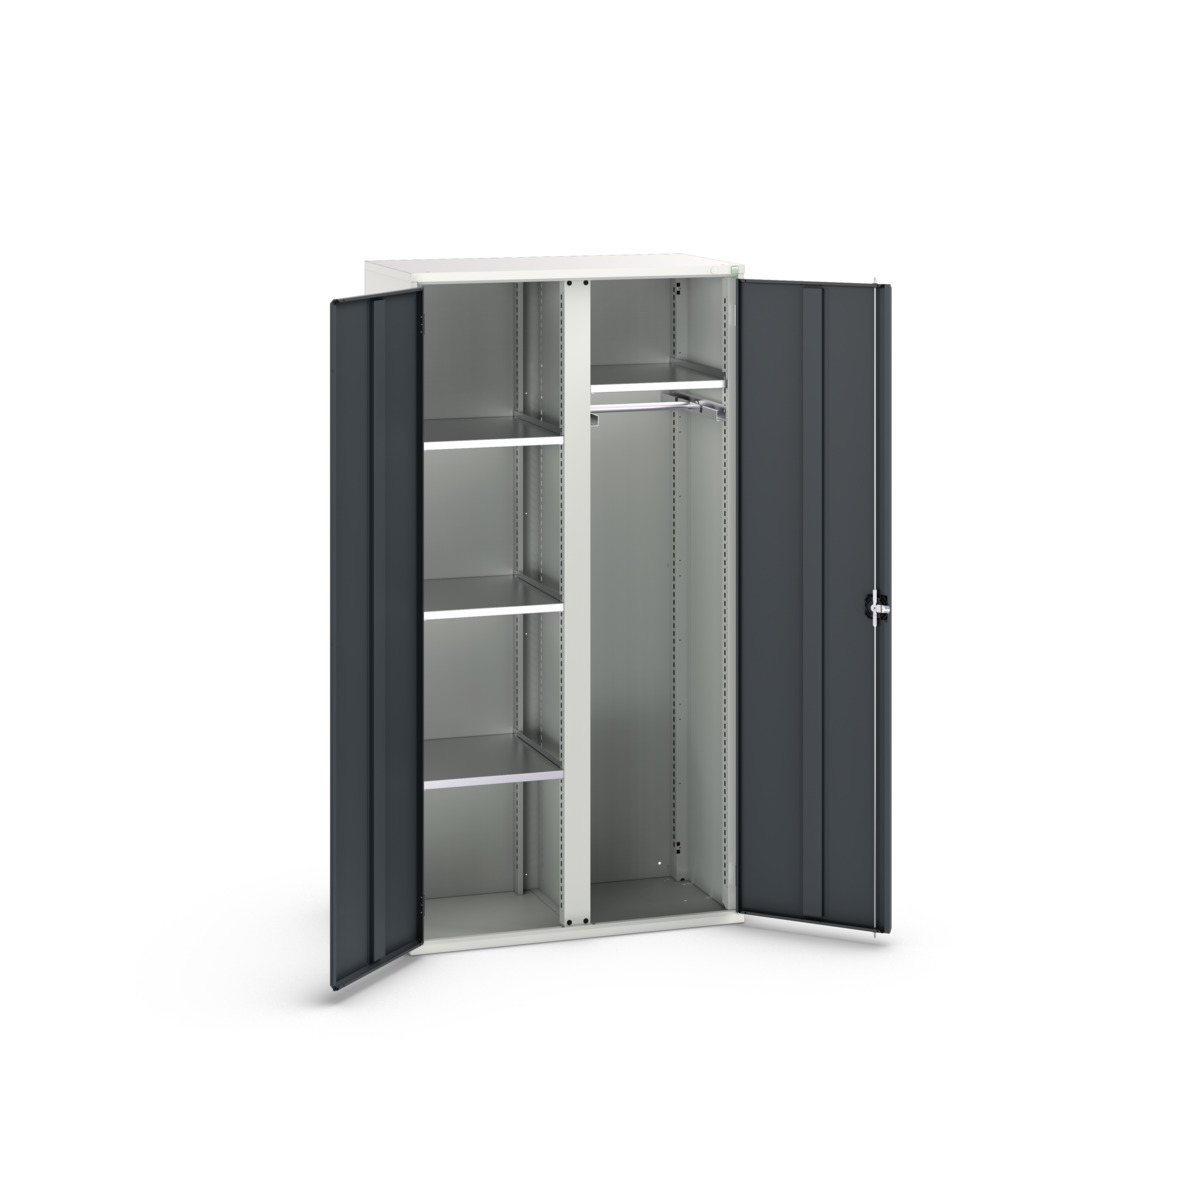 16926579.19 - verso kitted cupboard